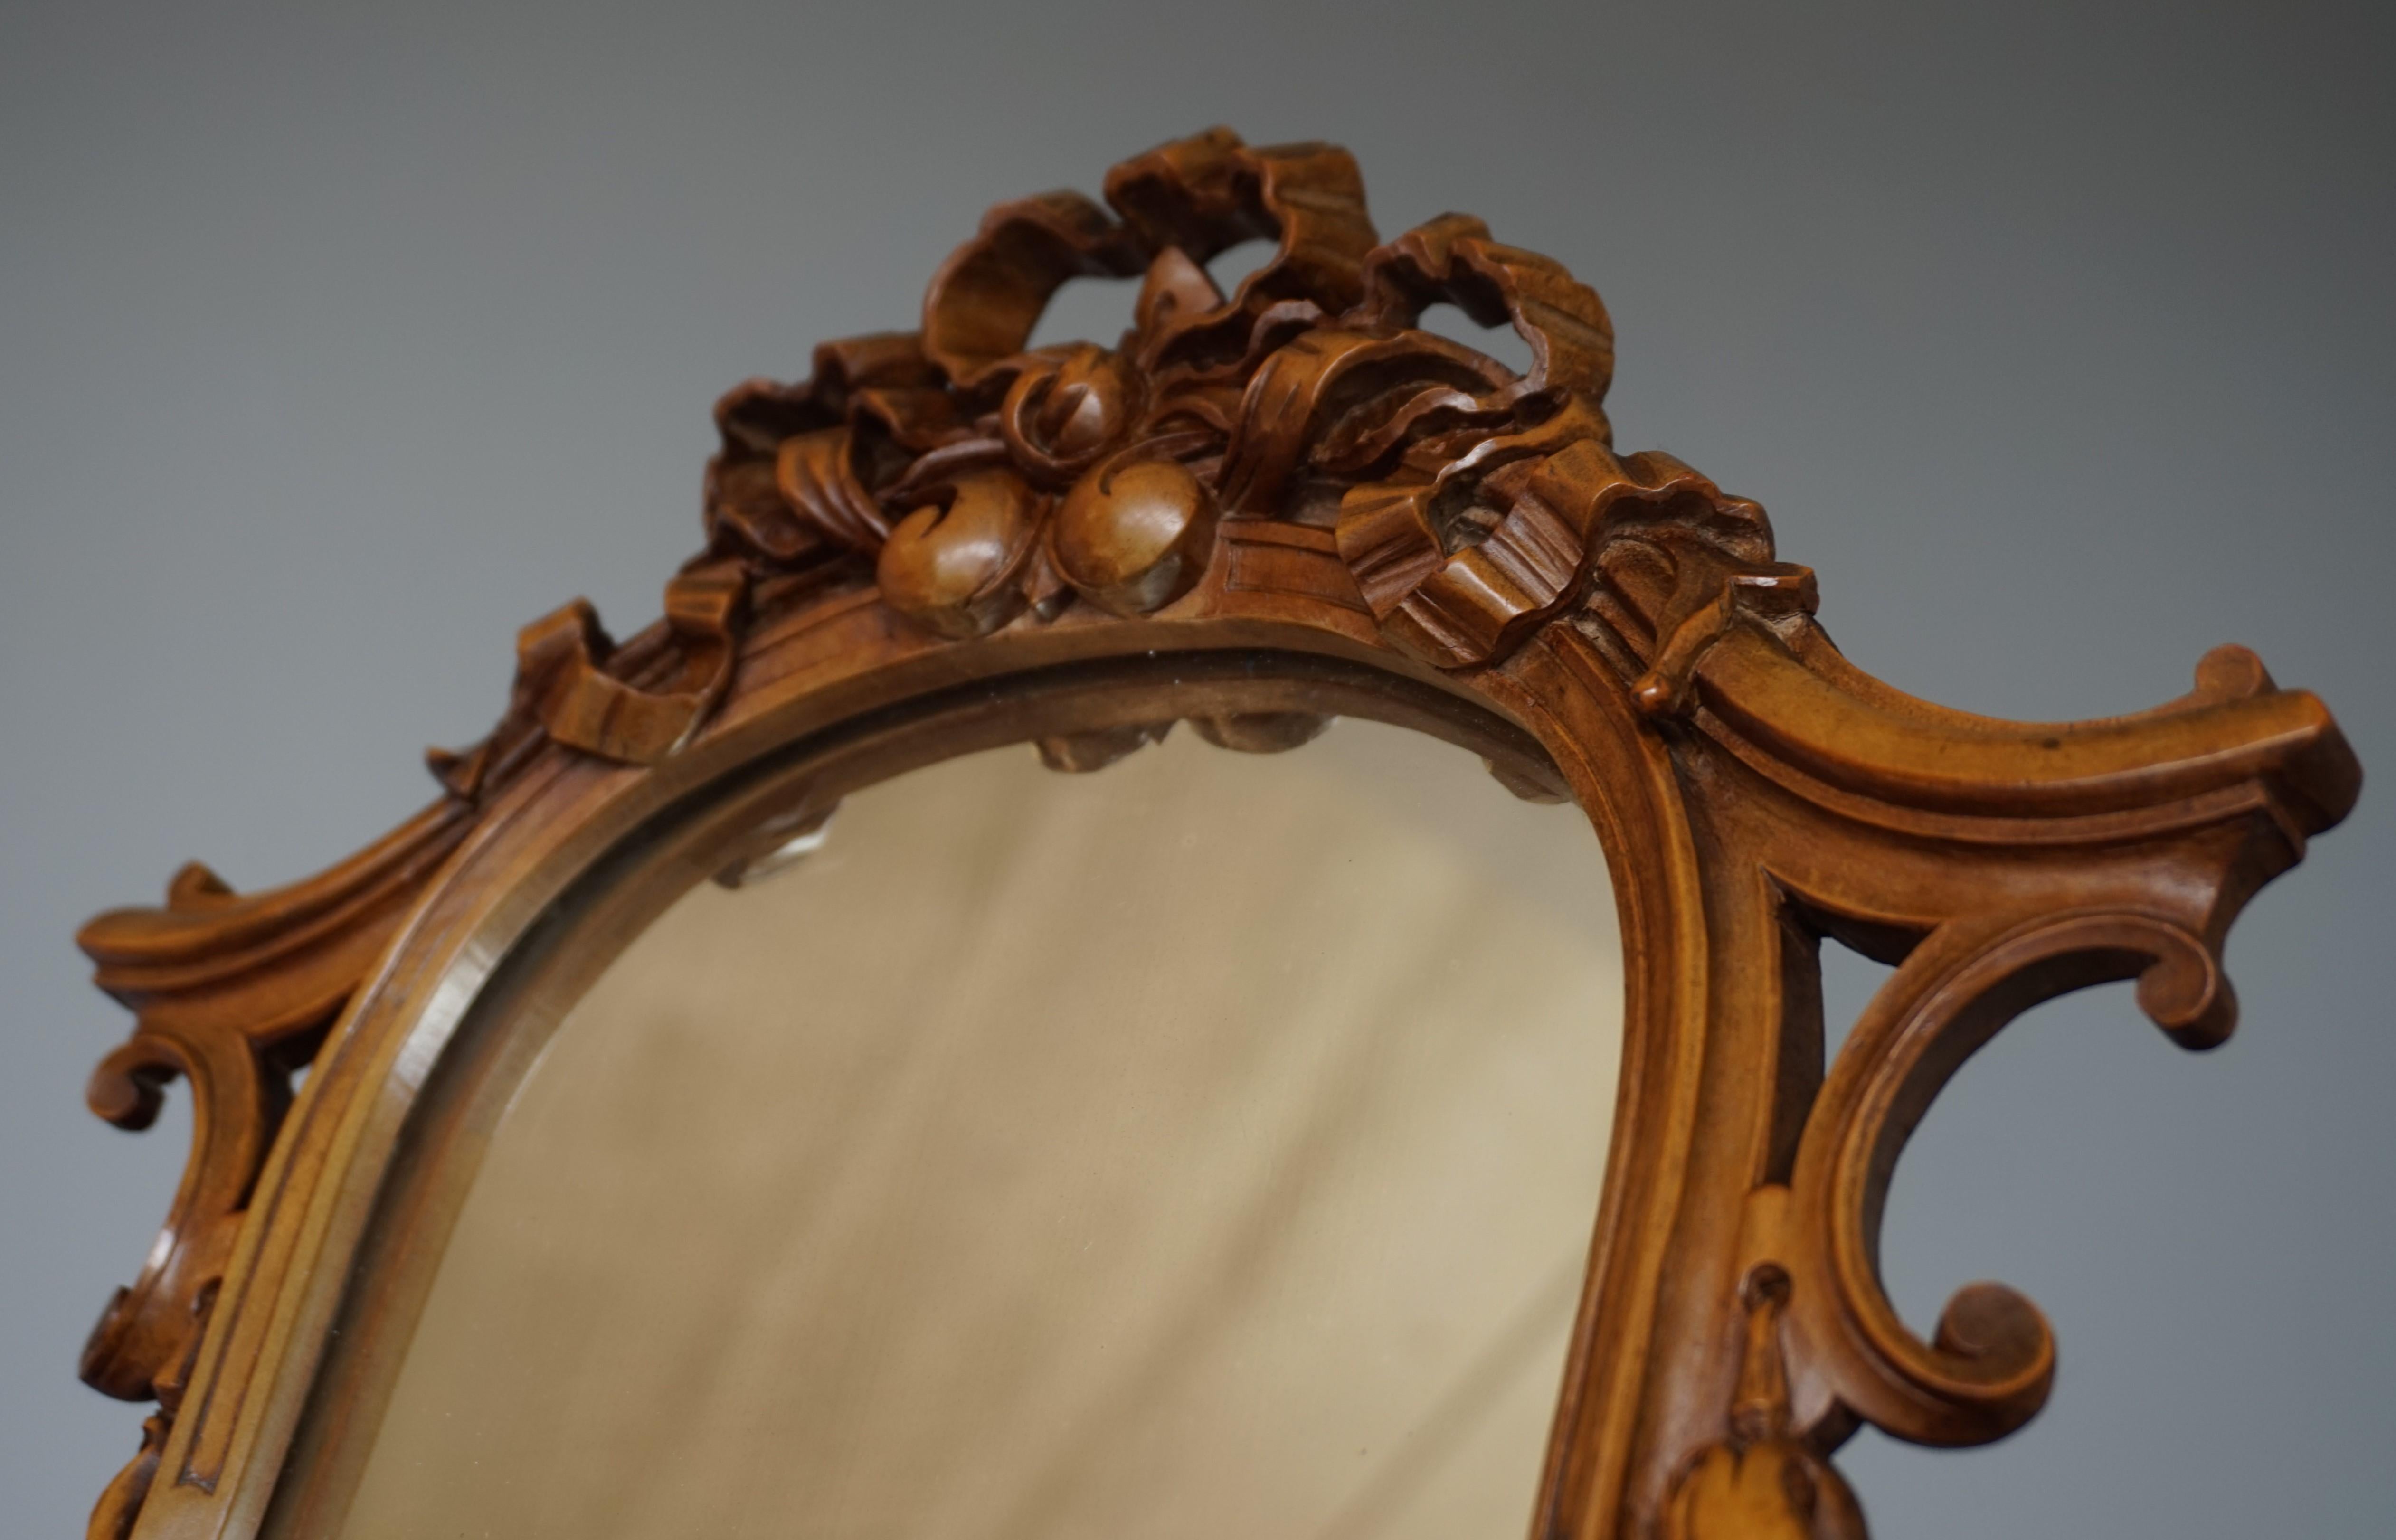 Hand-Carved Stunning Hand Carved Nutwood Table Mirror by Guéret Frères, Parisian Top Makers